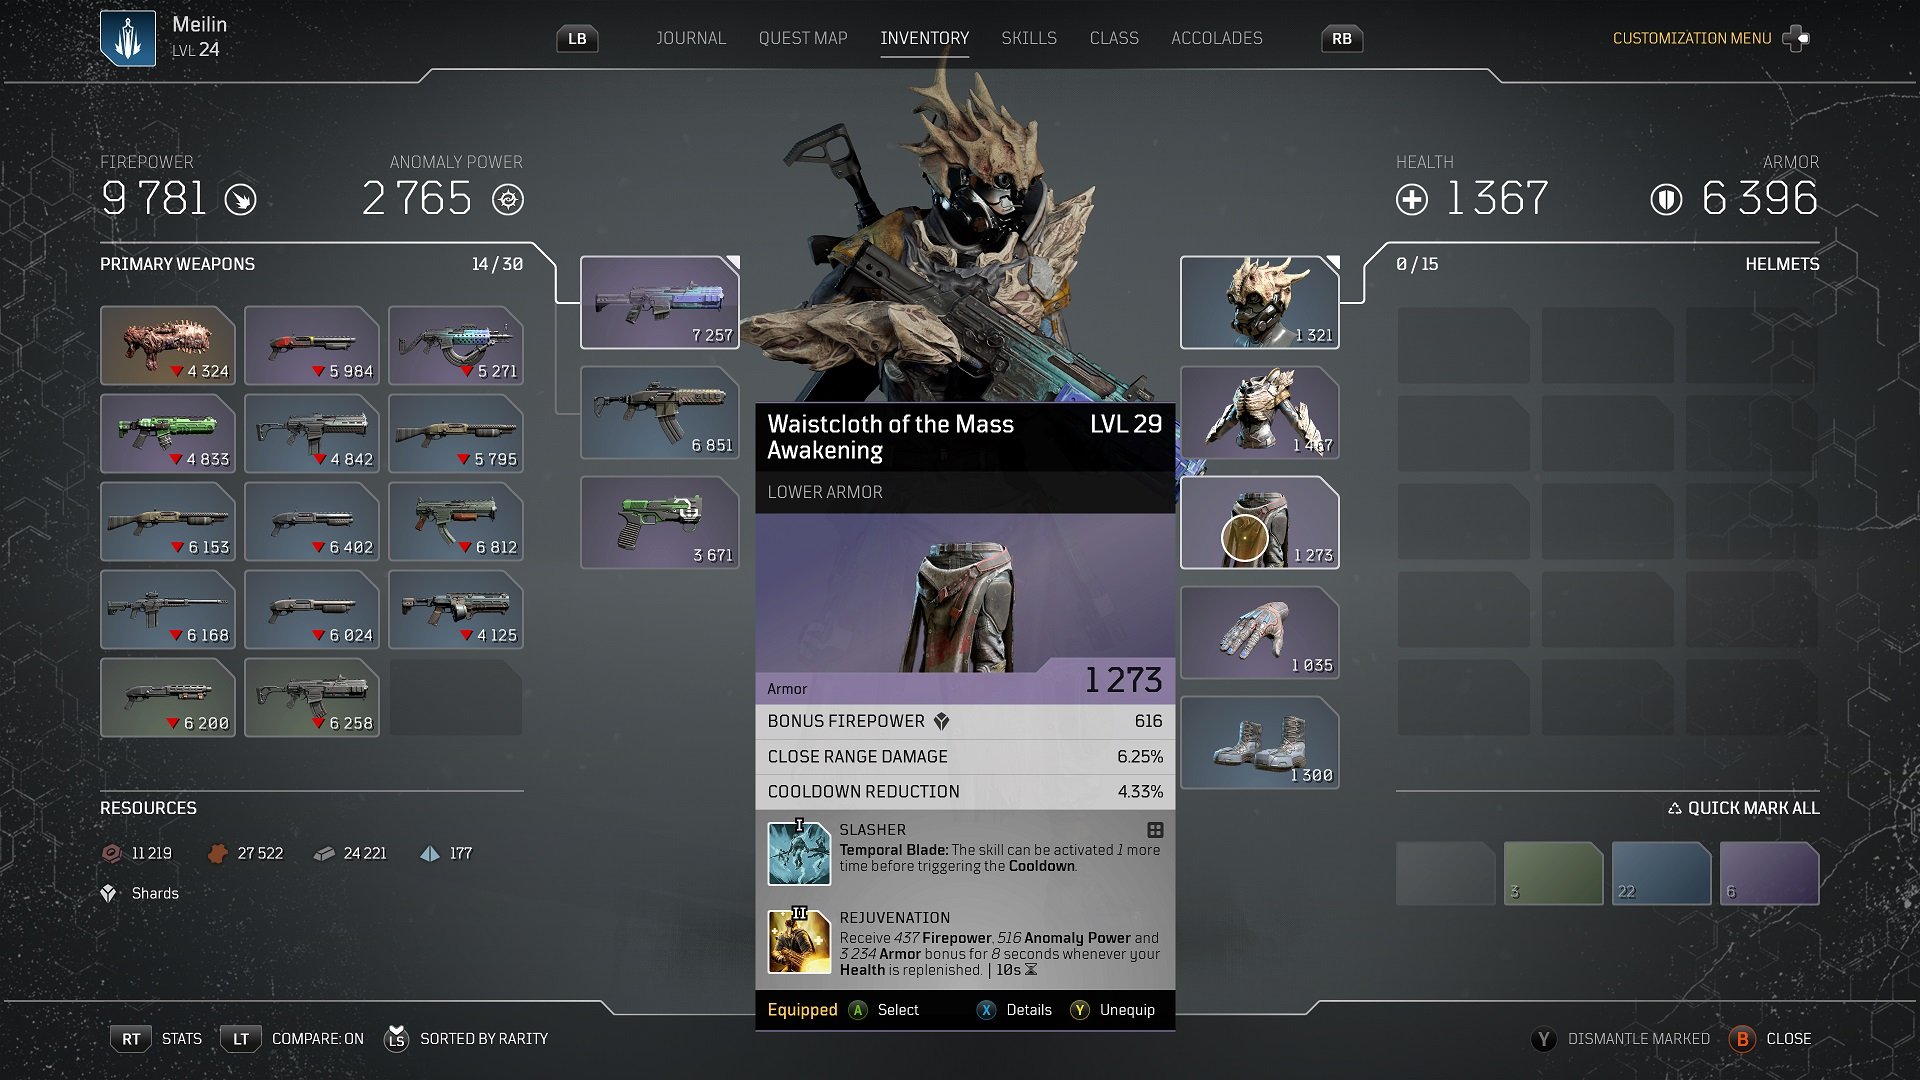 An image of the inventory screen